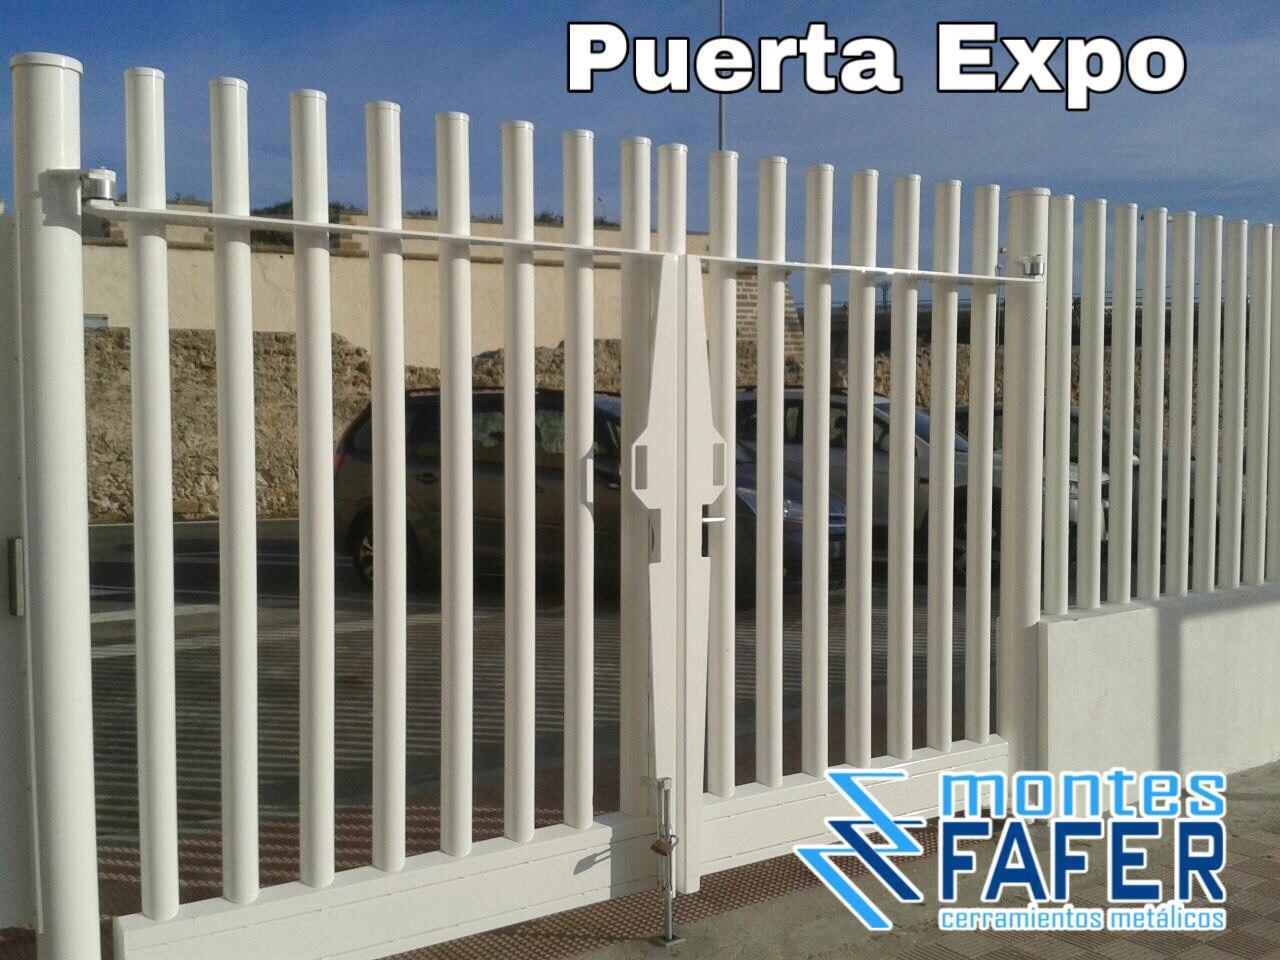 Puerta expo MontesFafer